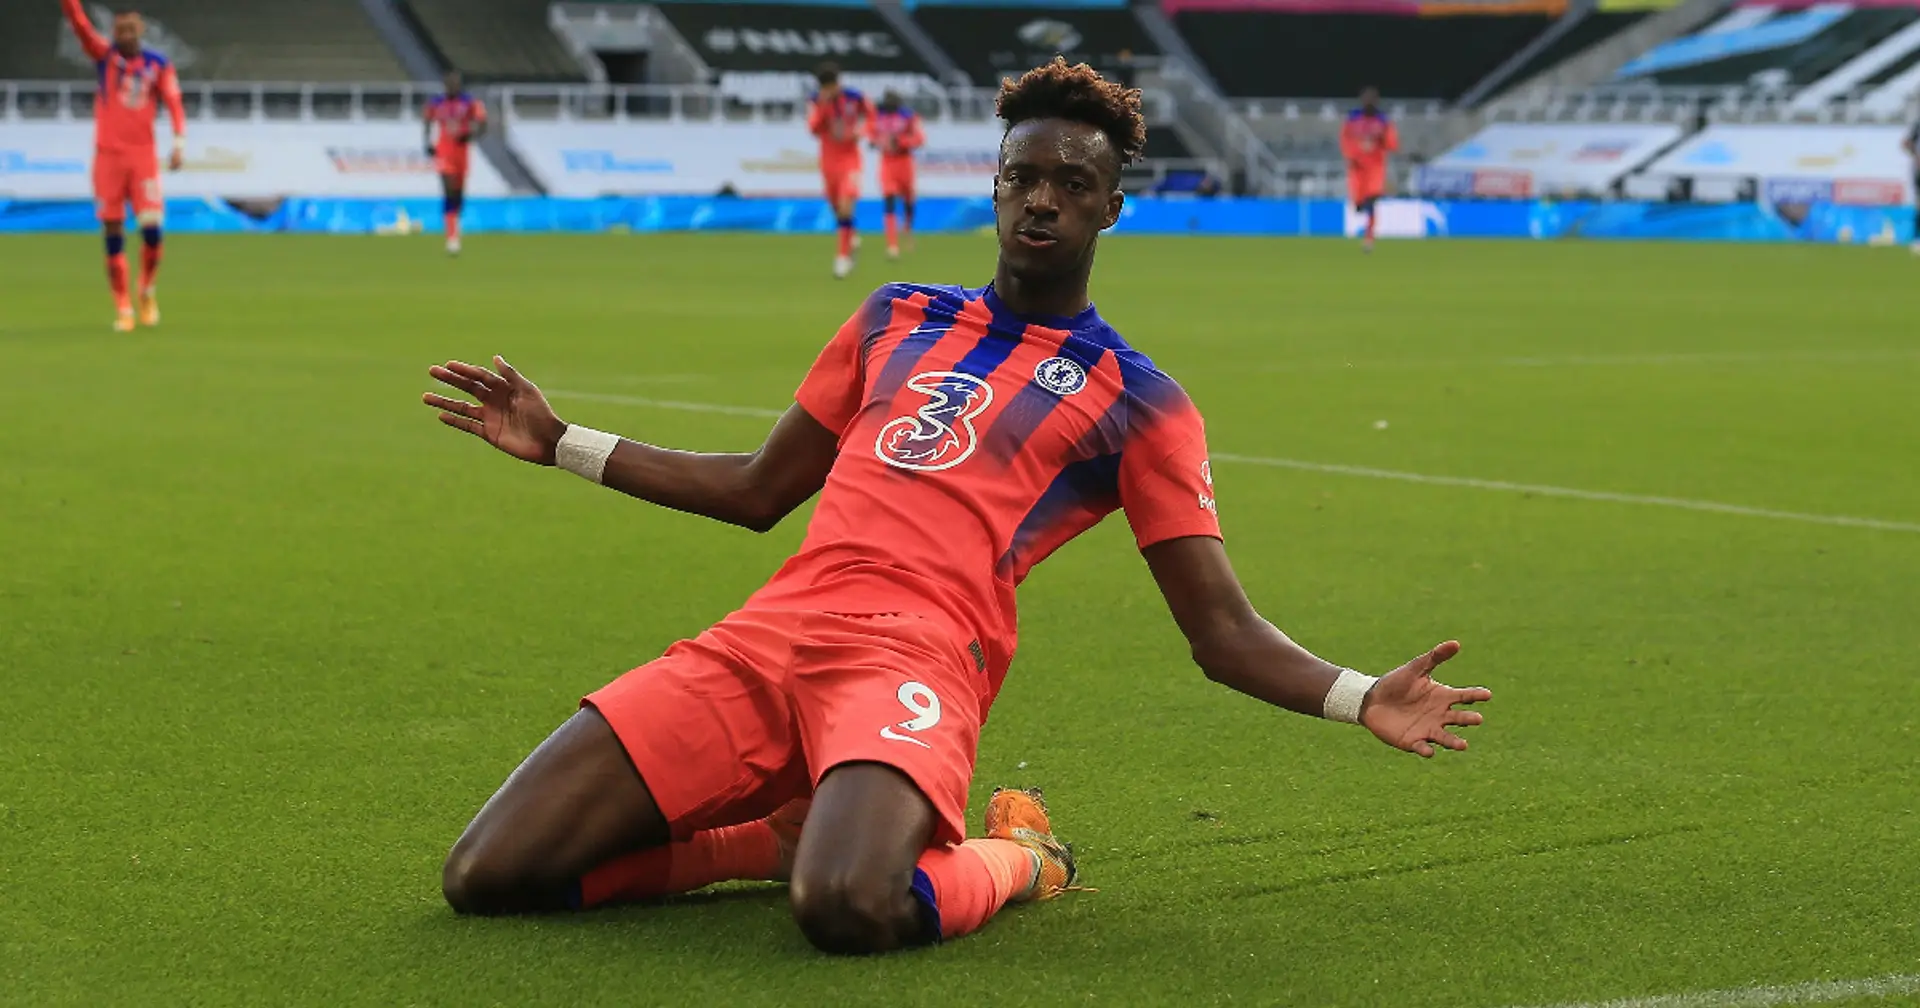 2nd in the league: Advanced stat showcases quality of Tammy Abraham's shots